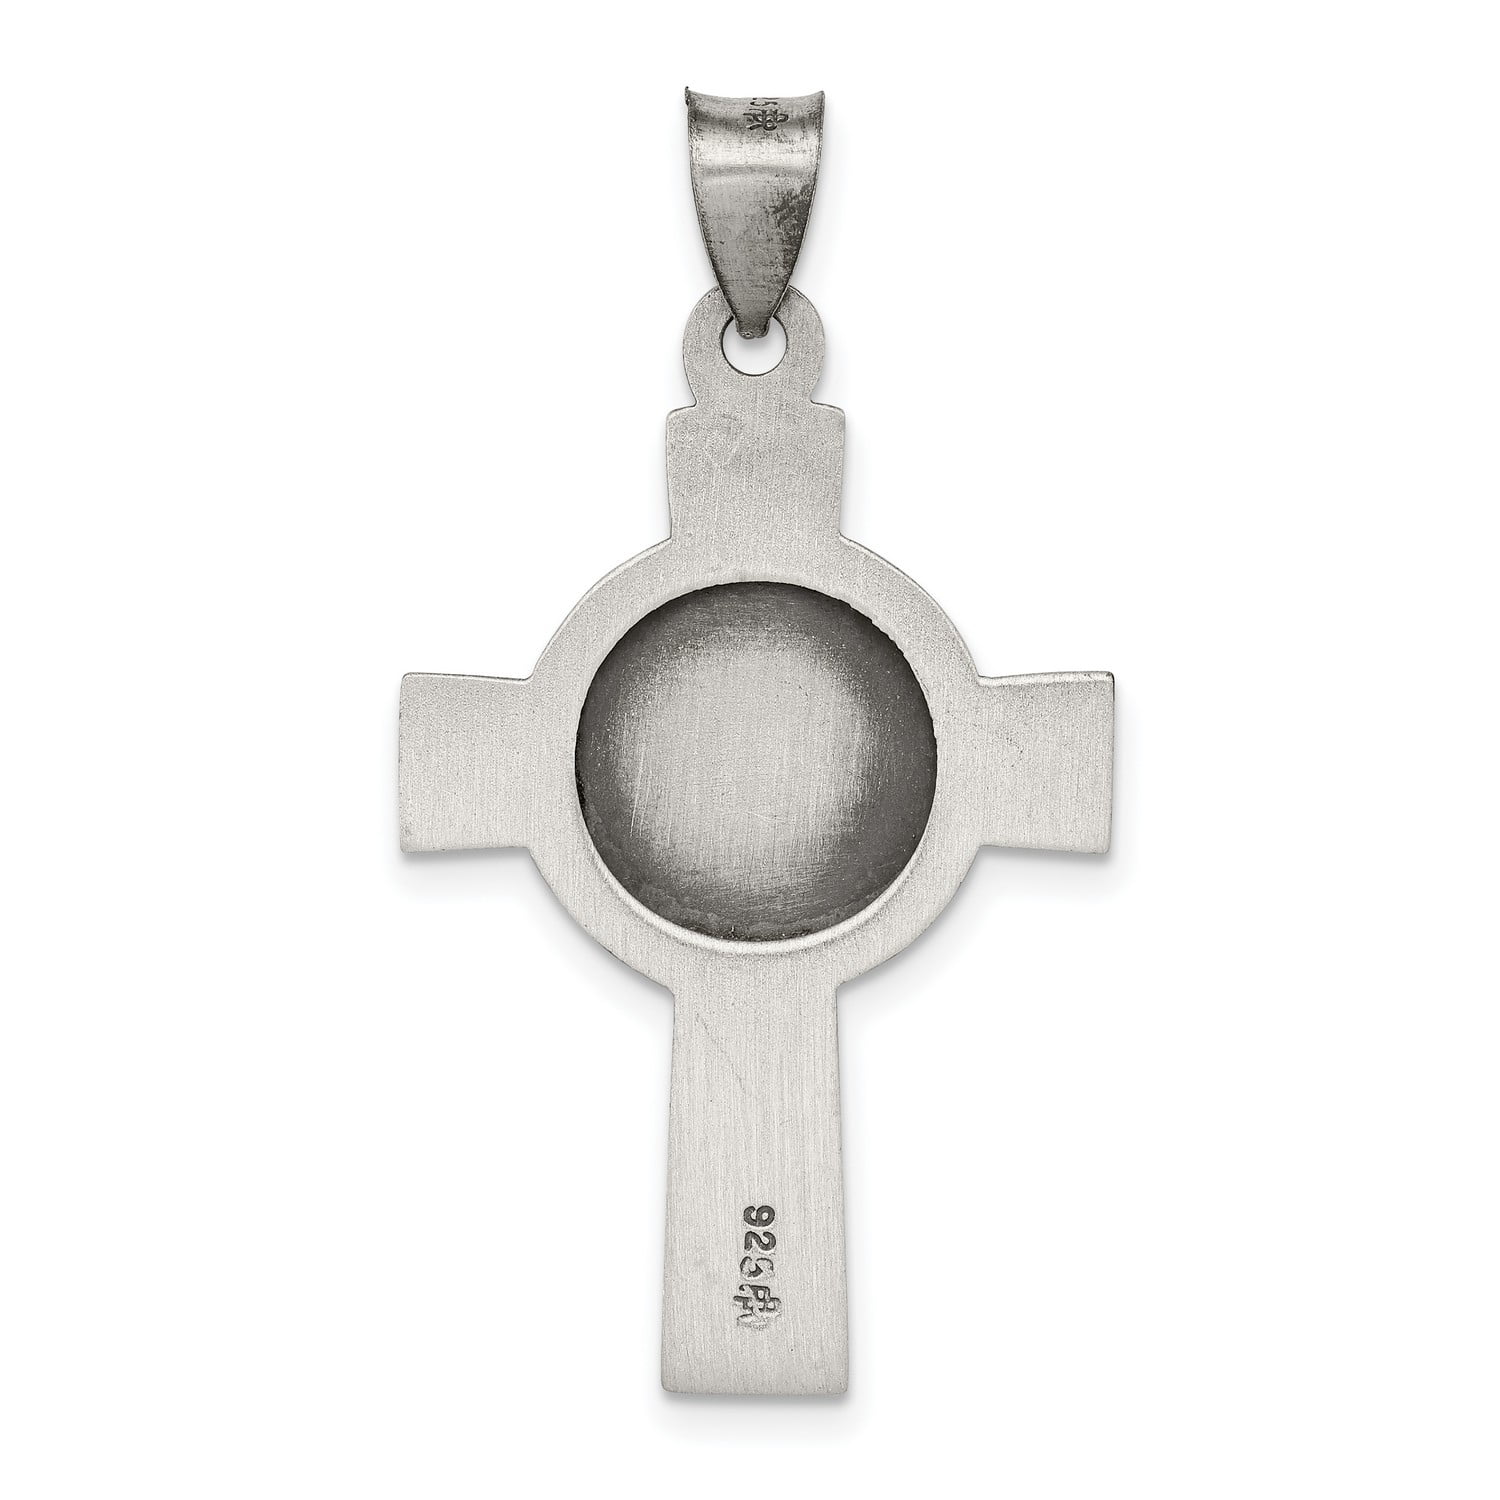 Saint Michael Pray For Us Words Celtic Cross Pendant In 925 Sterling Silver  37 mm x 20 mm